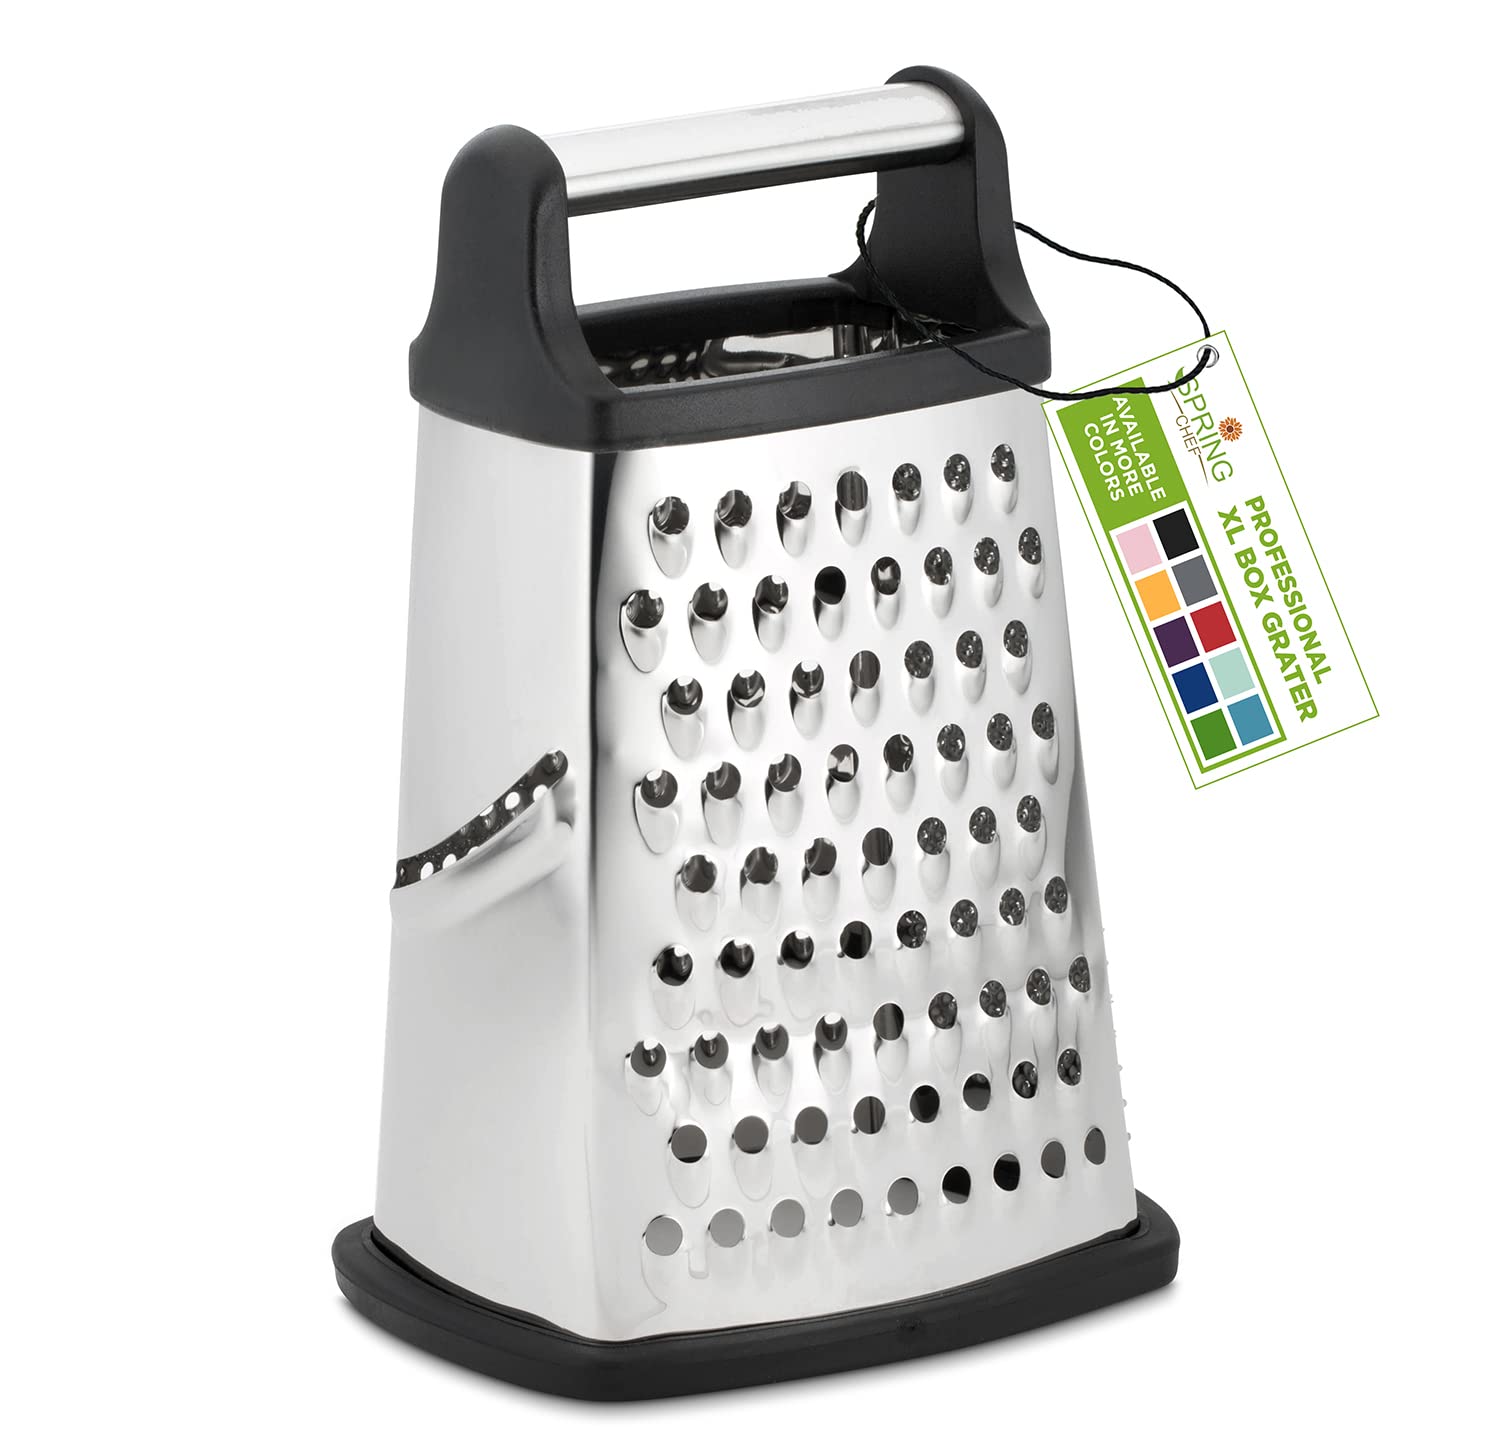 Spring Chef Professional Cheese Grater, Stainless Steel with Soft